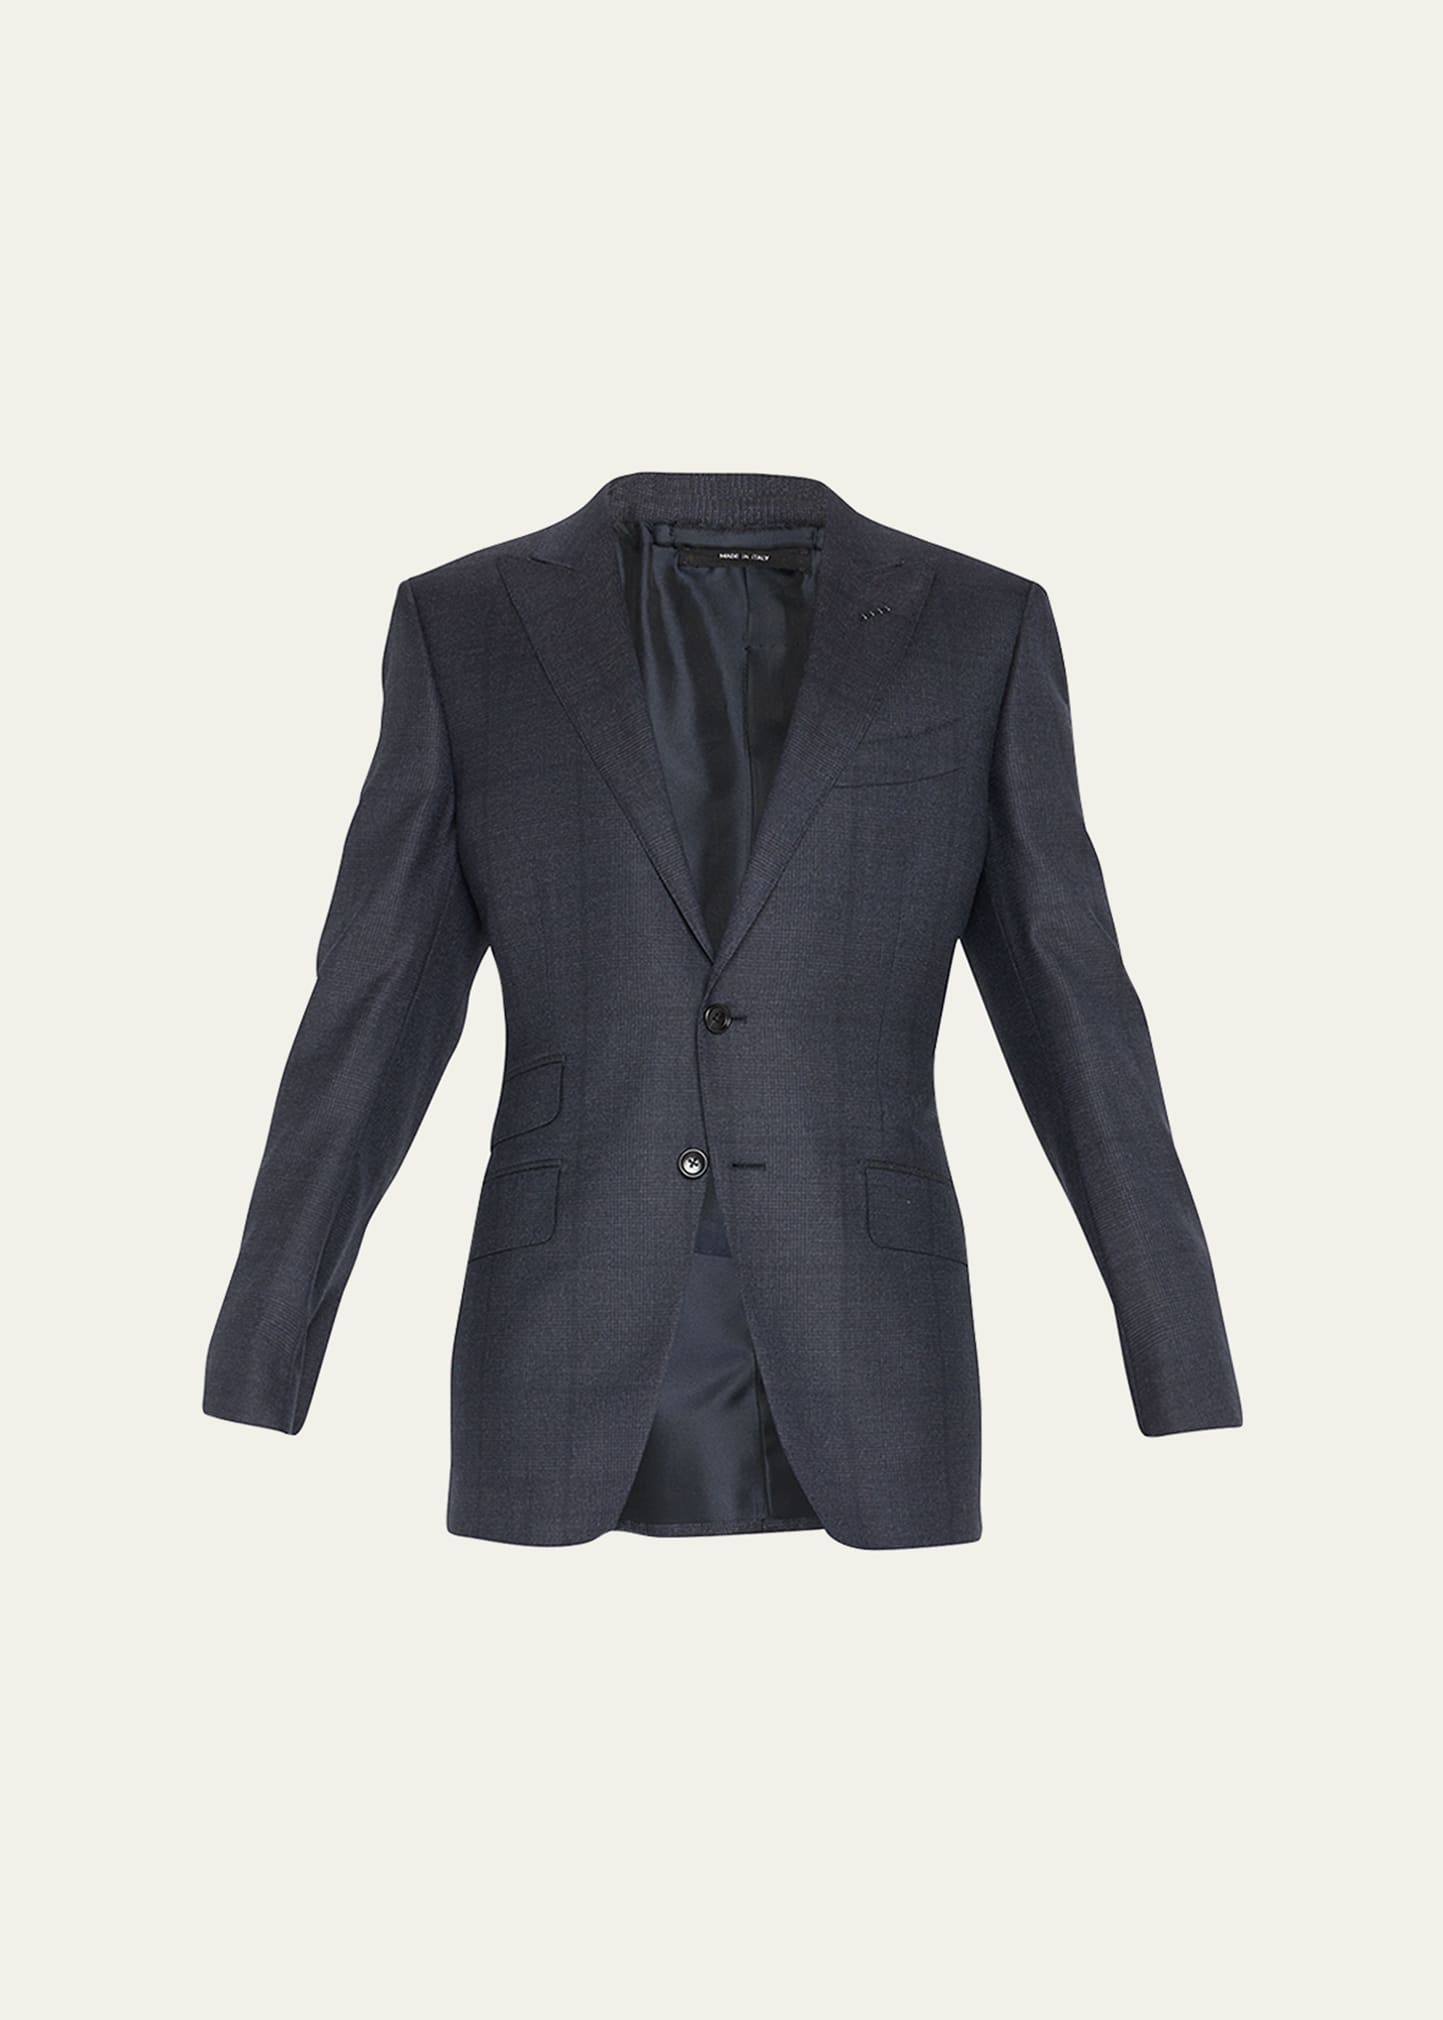 Tom Ford Men's O'connor Prince Of Wales Suit In Blue Navy Check